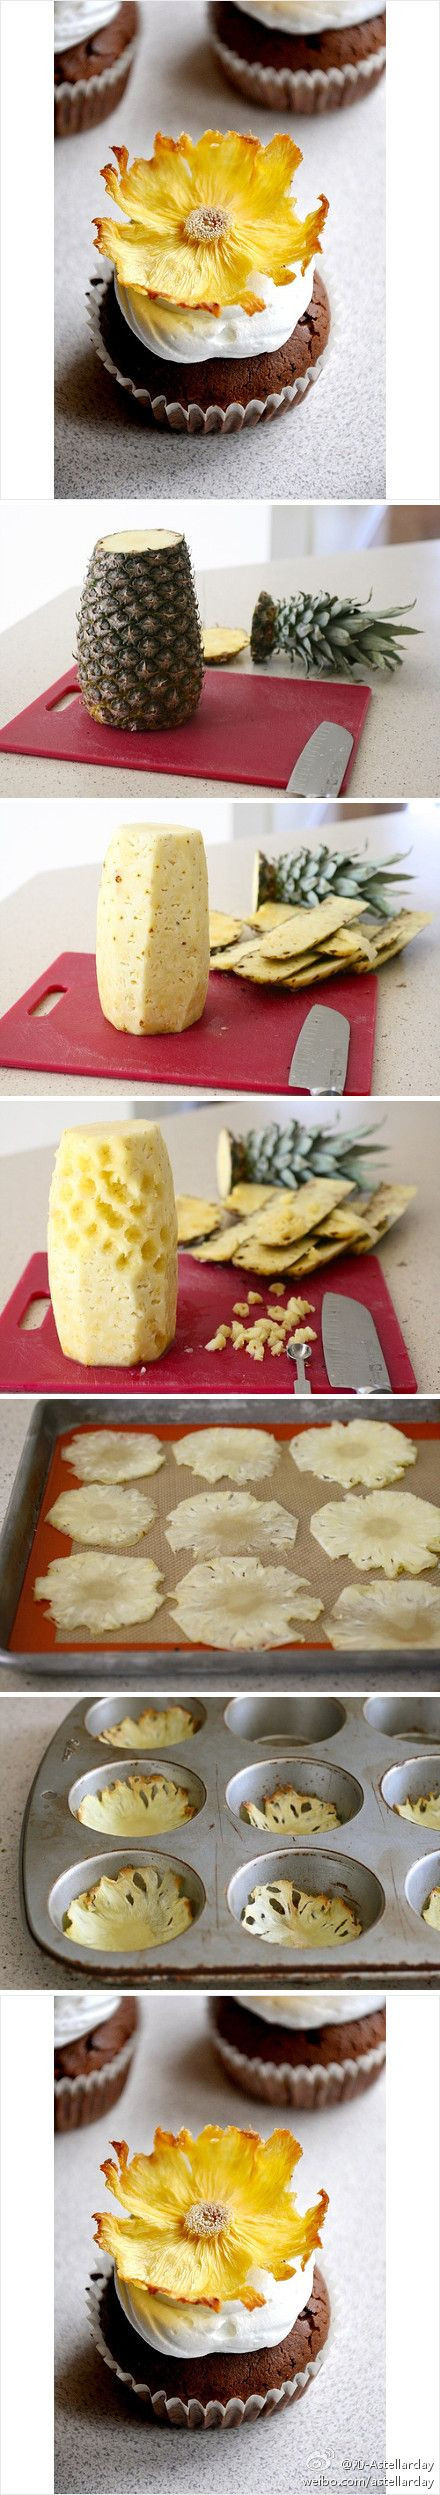 How to Make Dried Pineapple Flowers - Everyday Ann...